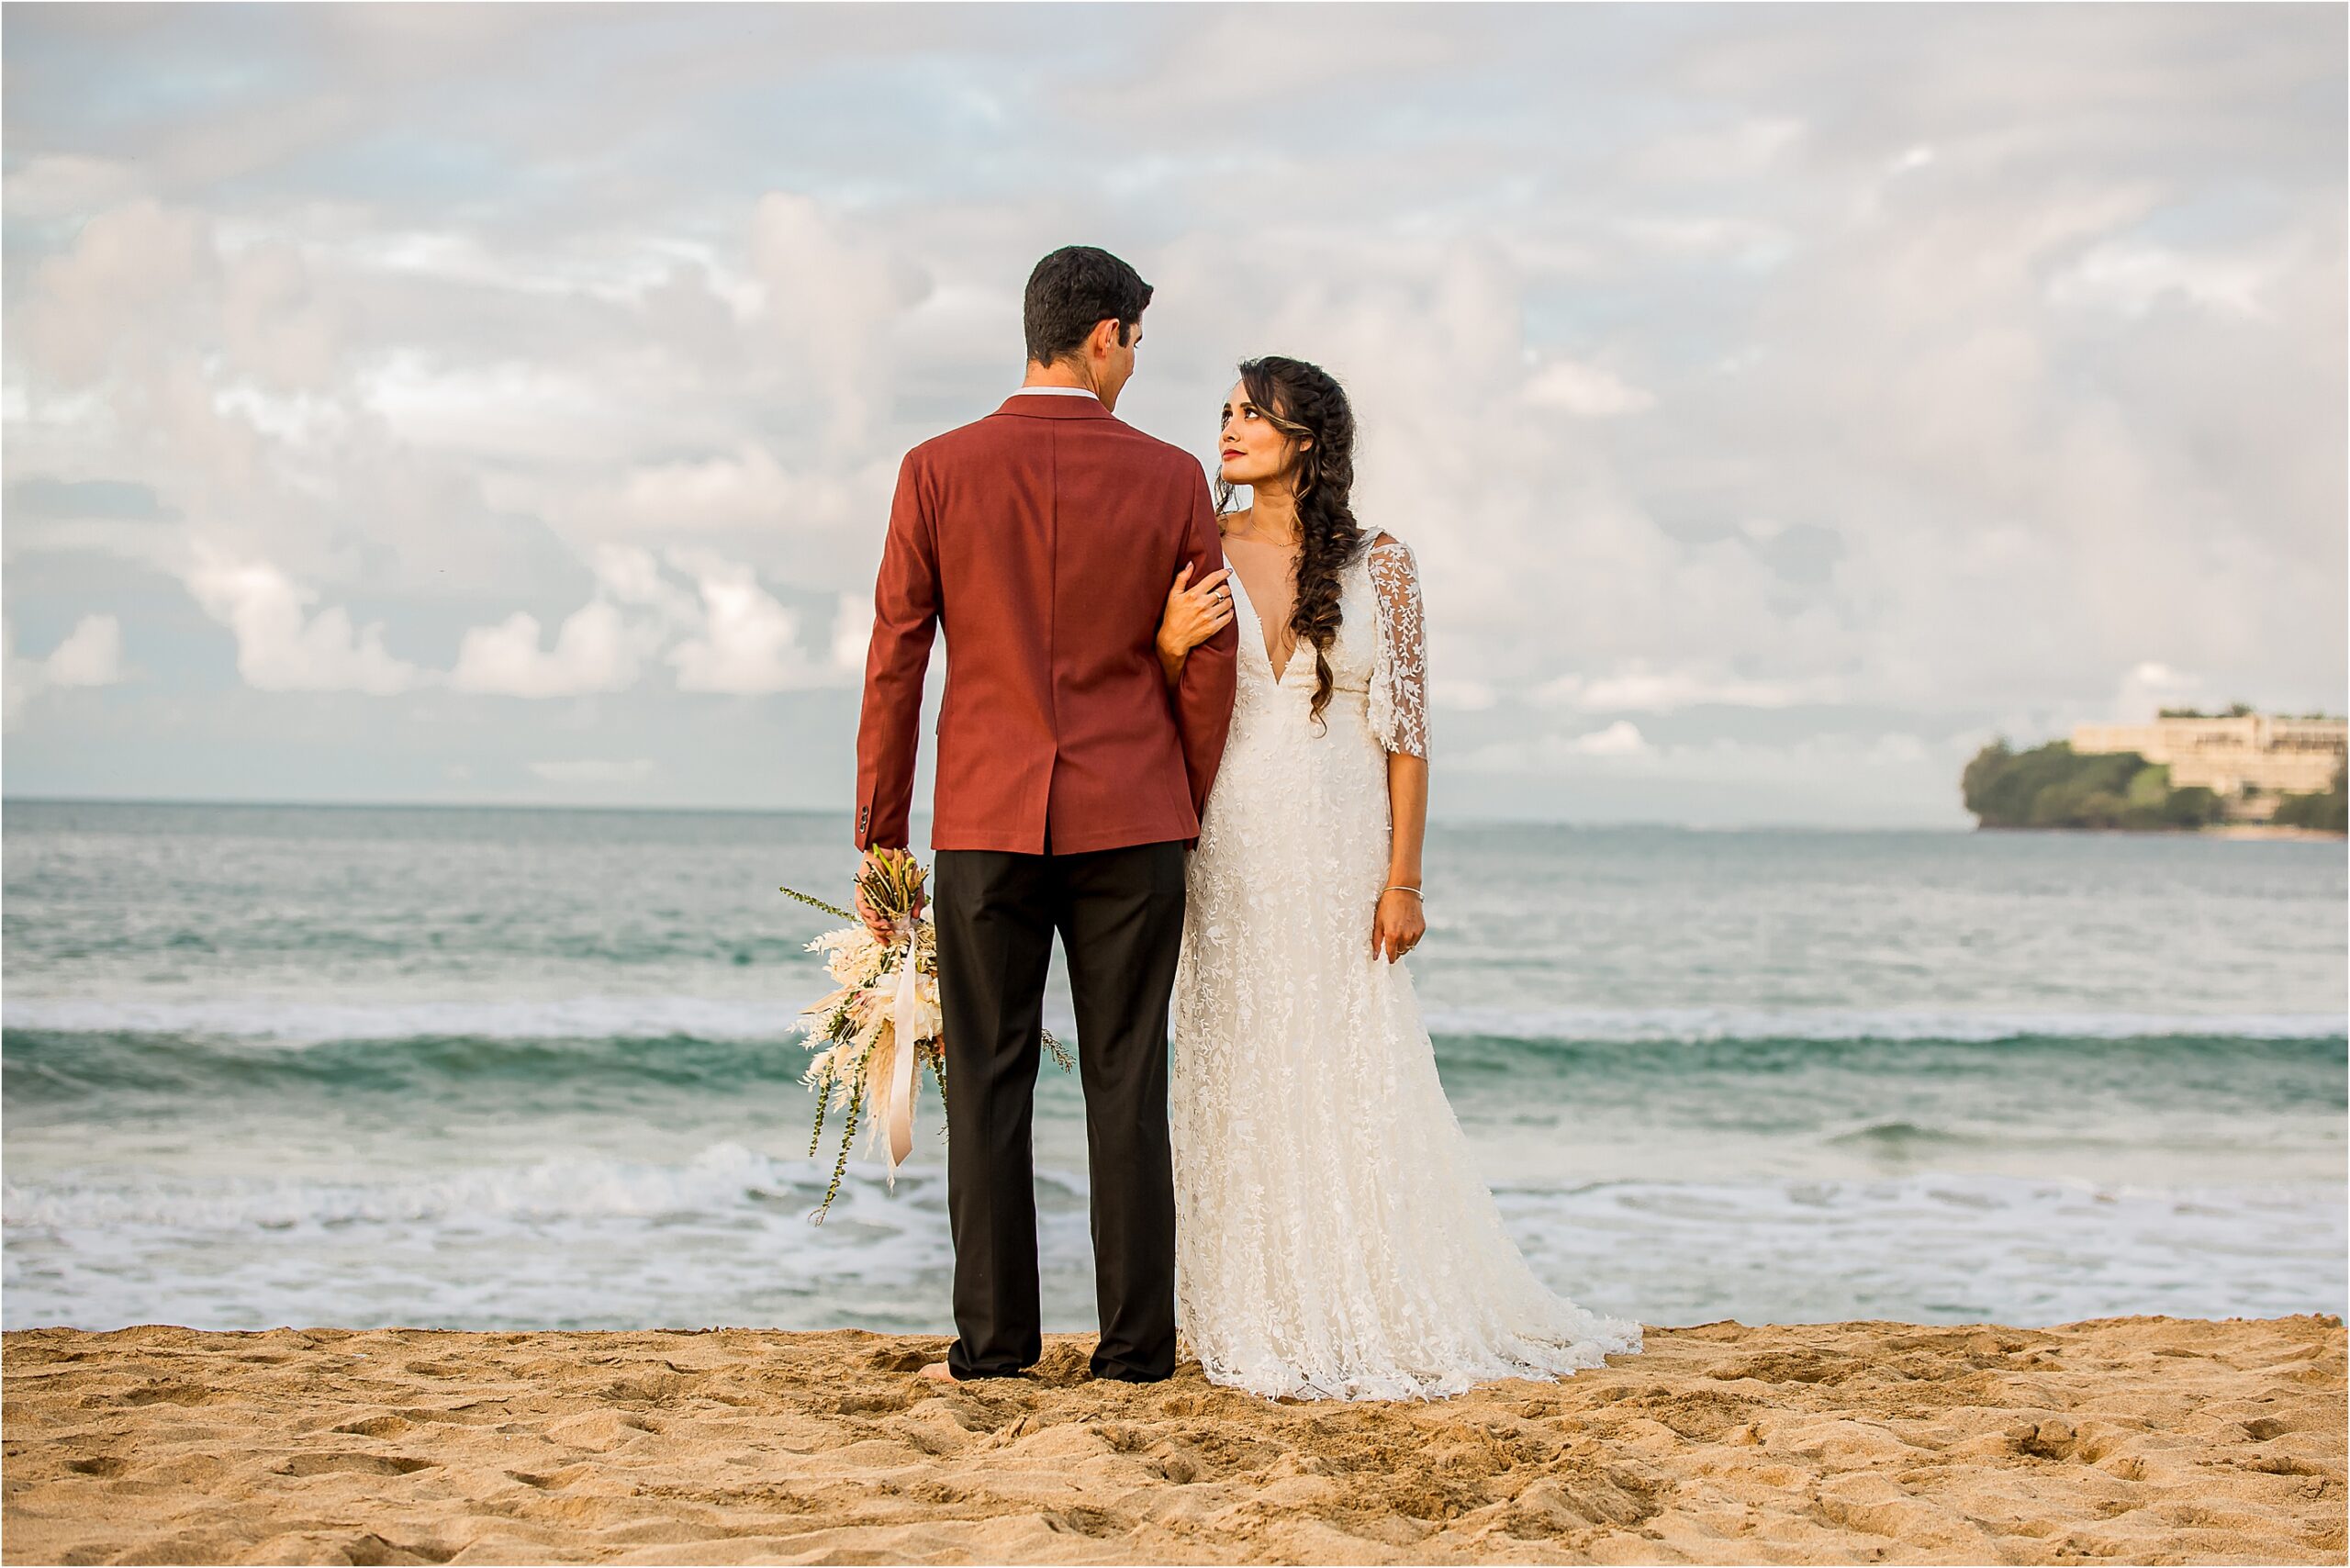 Bride and groom on the beach at sunset for their elopement